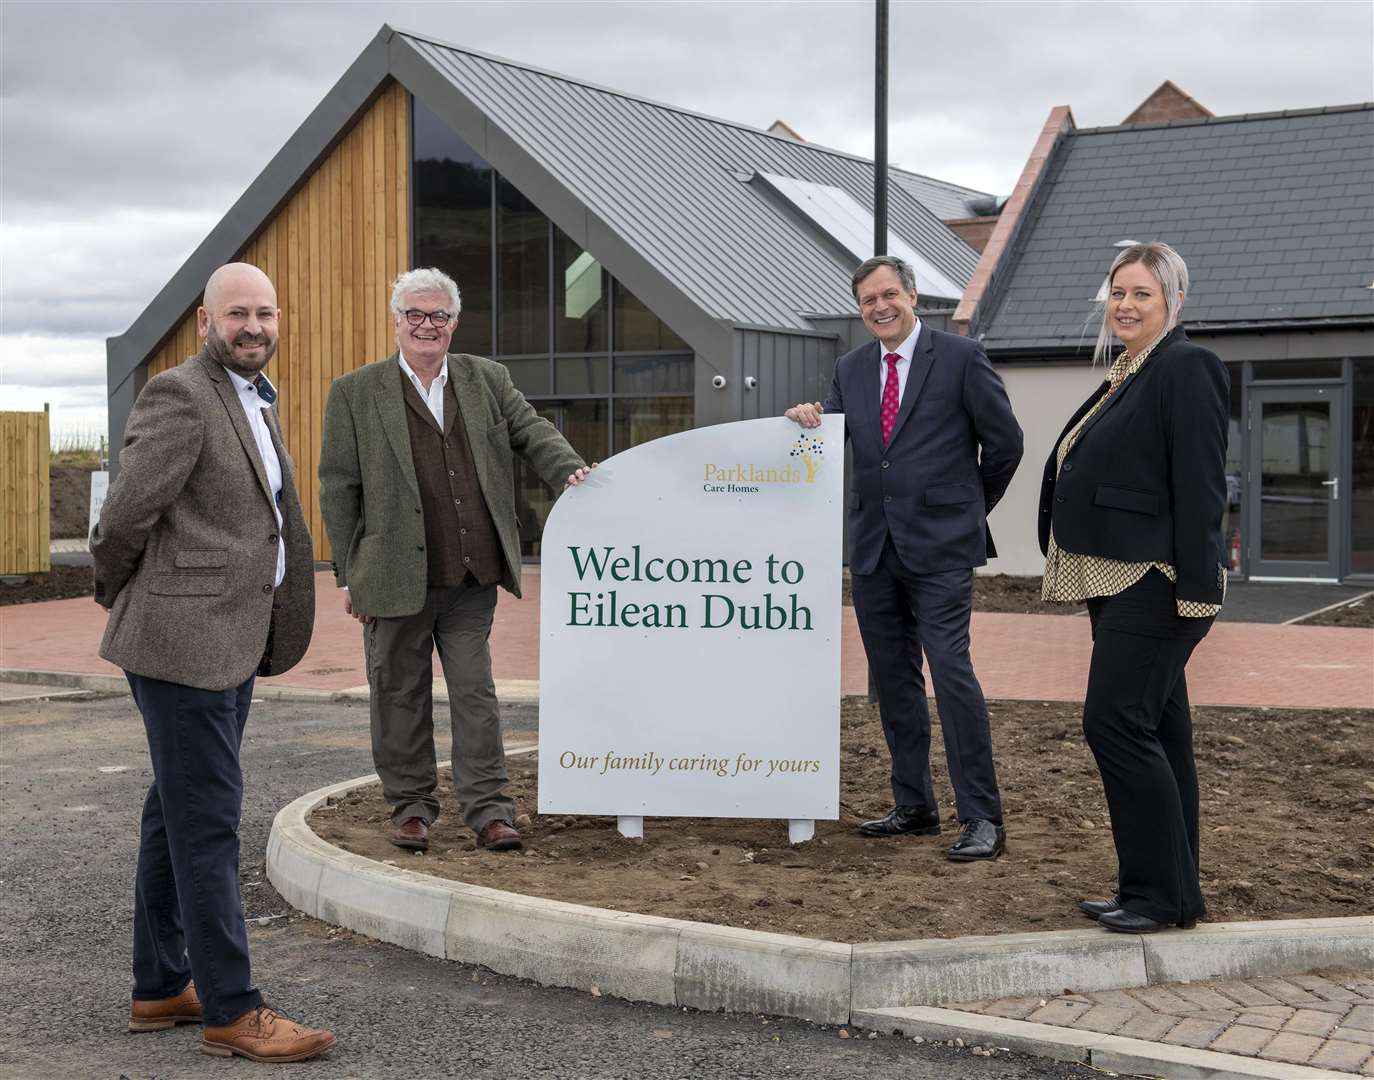 At Eilean Dubh care hjome in Fortrose were architect Bryan McFadzean,Brian Devlin of Black Isle Cares, Parkland Care Homes MD Ron Taylor and the facility's manager, Sharon Reid.